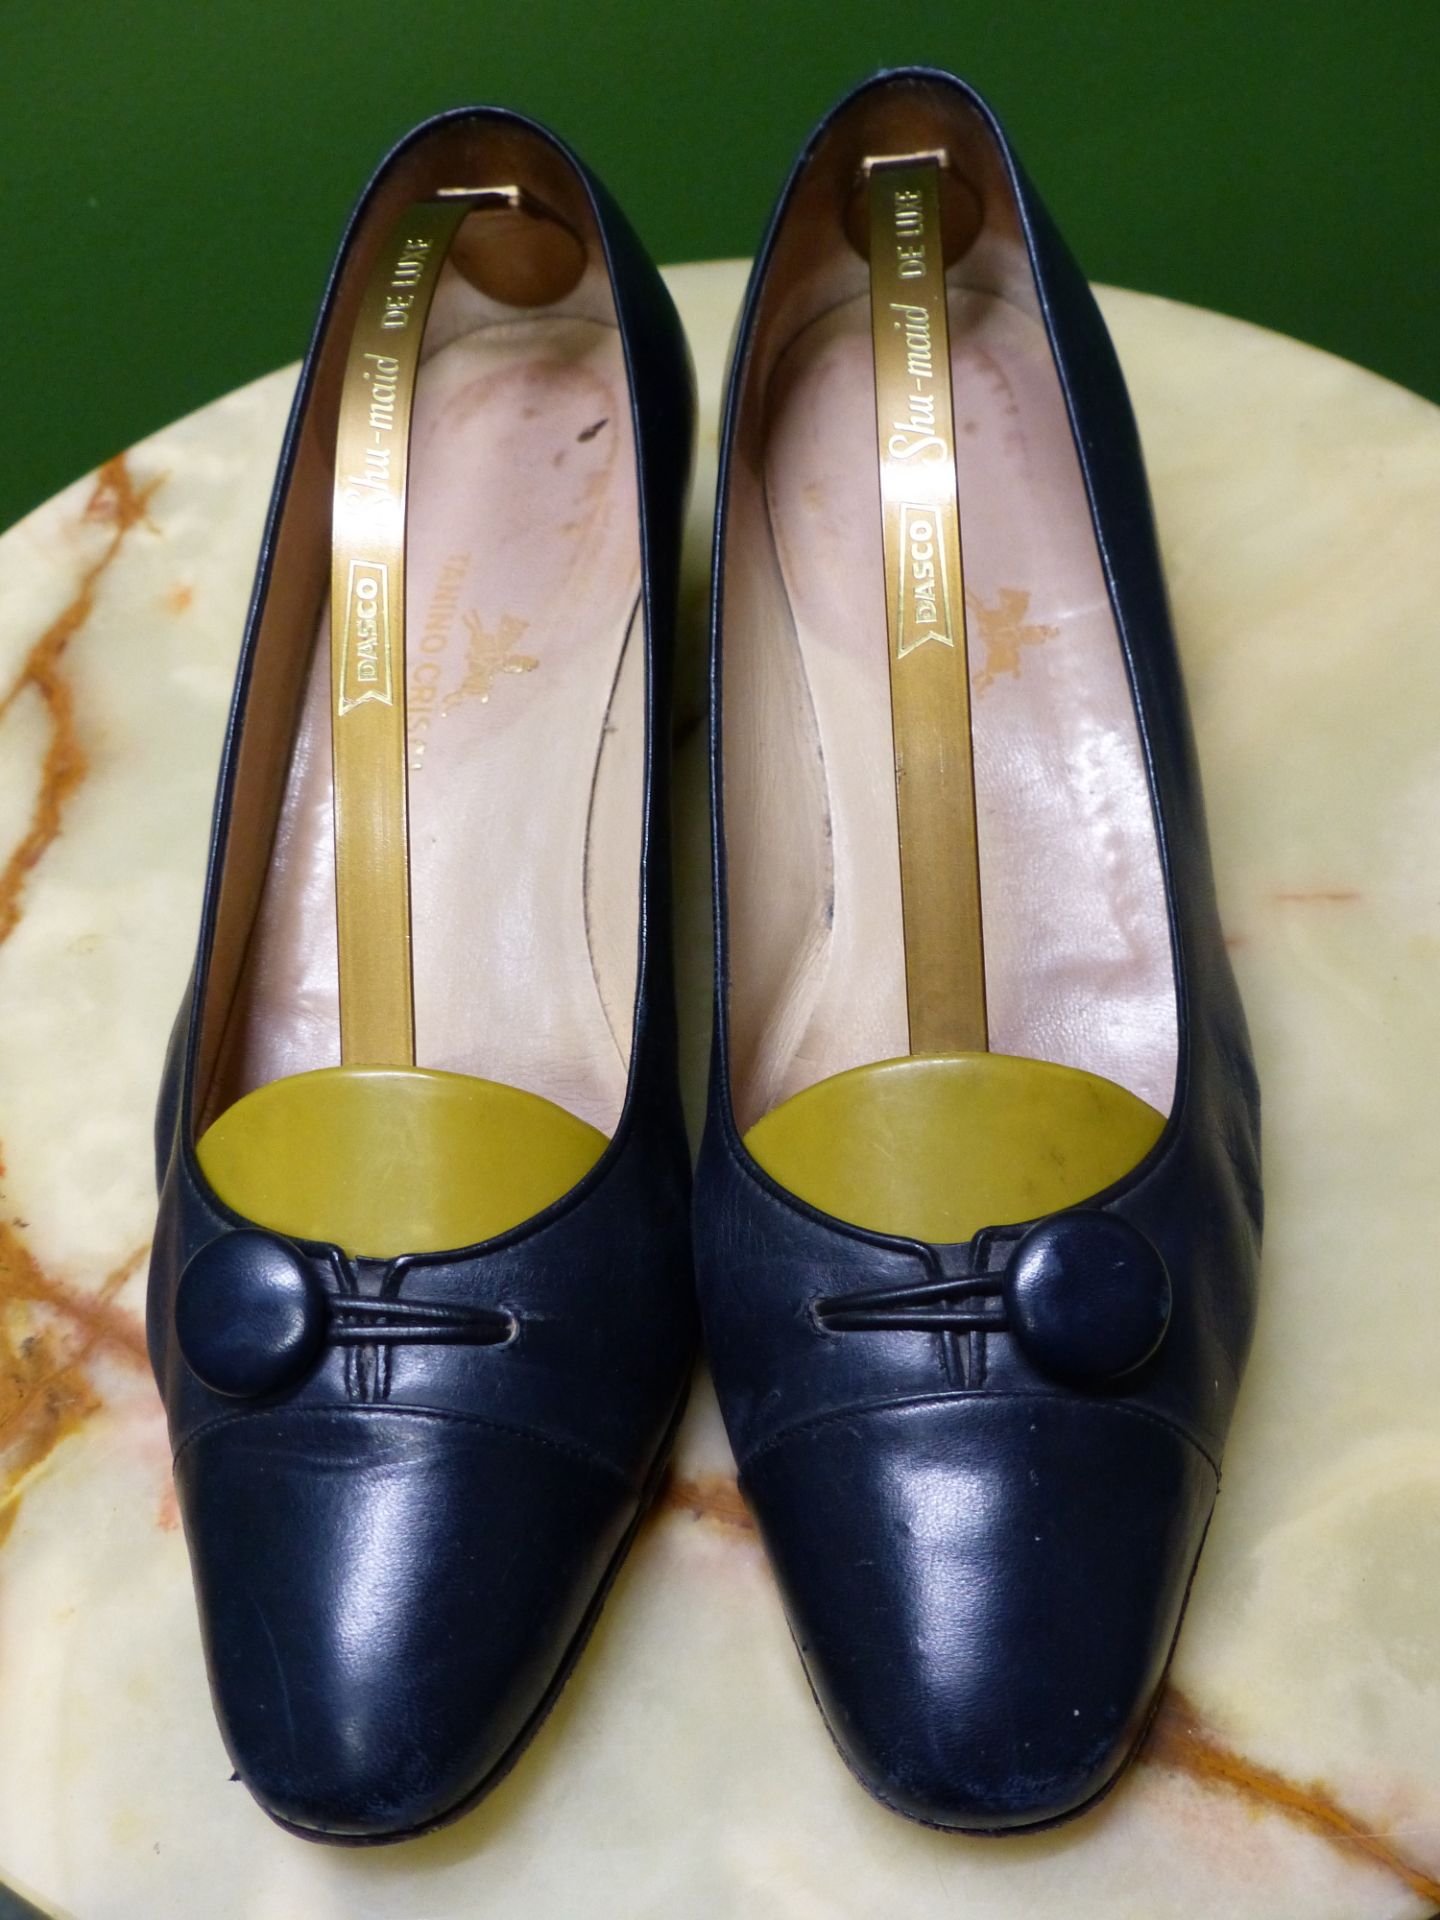 SHOES. TWO PAIRS TANINO CRISCI NAVY AND MUSTARD HEALS EUR SIZE 39. WHITE AND NAVY SLIP ON'S EUR SIZE - Image 6 of 8